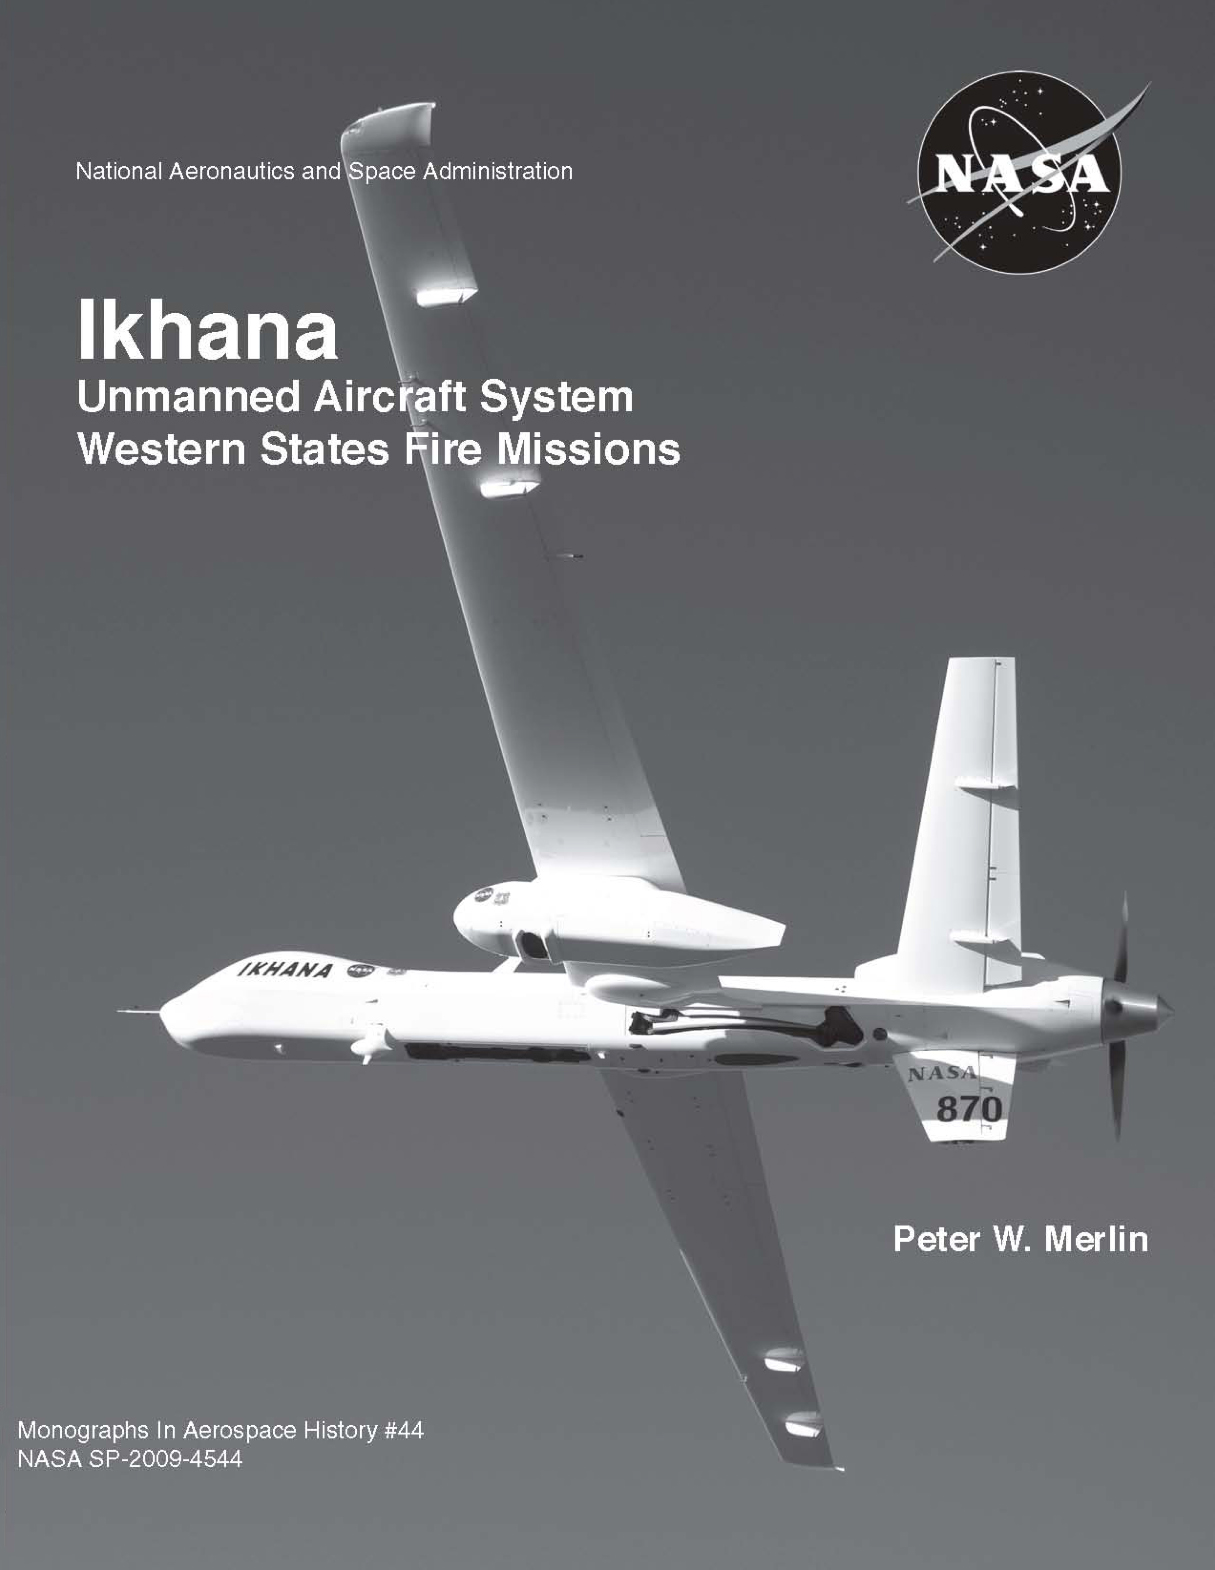 Ikhana Unmanned Aircraft System Western States Fire Missions Monograph Cover.